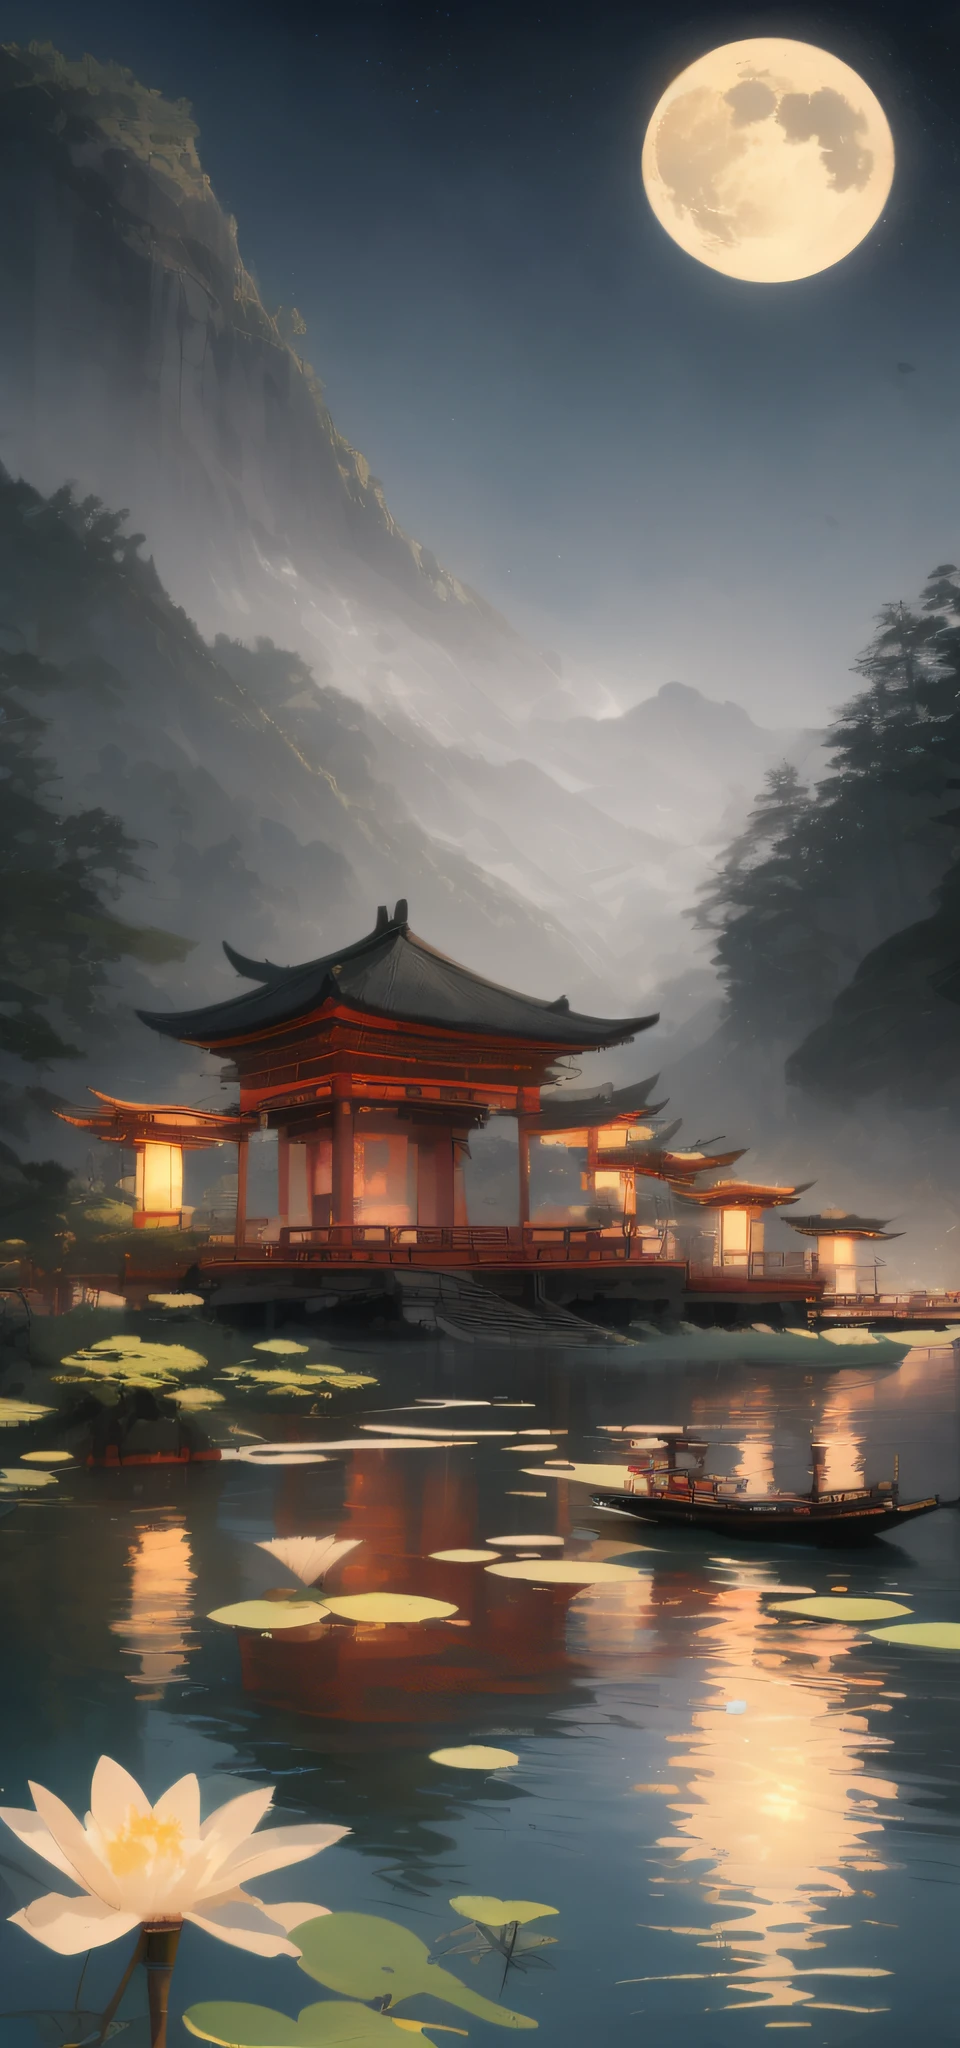 masterpiece, best quality, Chinese martial arts style, an Asian night scene with lanterns and water lilies, Asian lagoon with lanterns and boats night scene with many lights and boats on the water, lake surface, lotus flowers, beautiful night scene, ((Chinese martial arts style)))), with vast sky, continuous mountains and steep cliffs, inkwashing style,  contour light, atmospheric atmosphere, depth of field, rising mist, bamboo, pine trees, octagonal stone pavilion, waterfall running water, large full moon, (No color), Monochrome, light color,